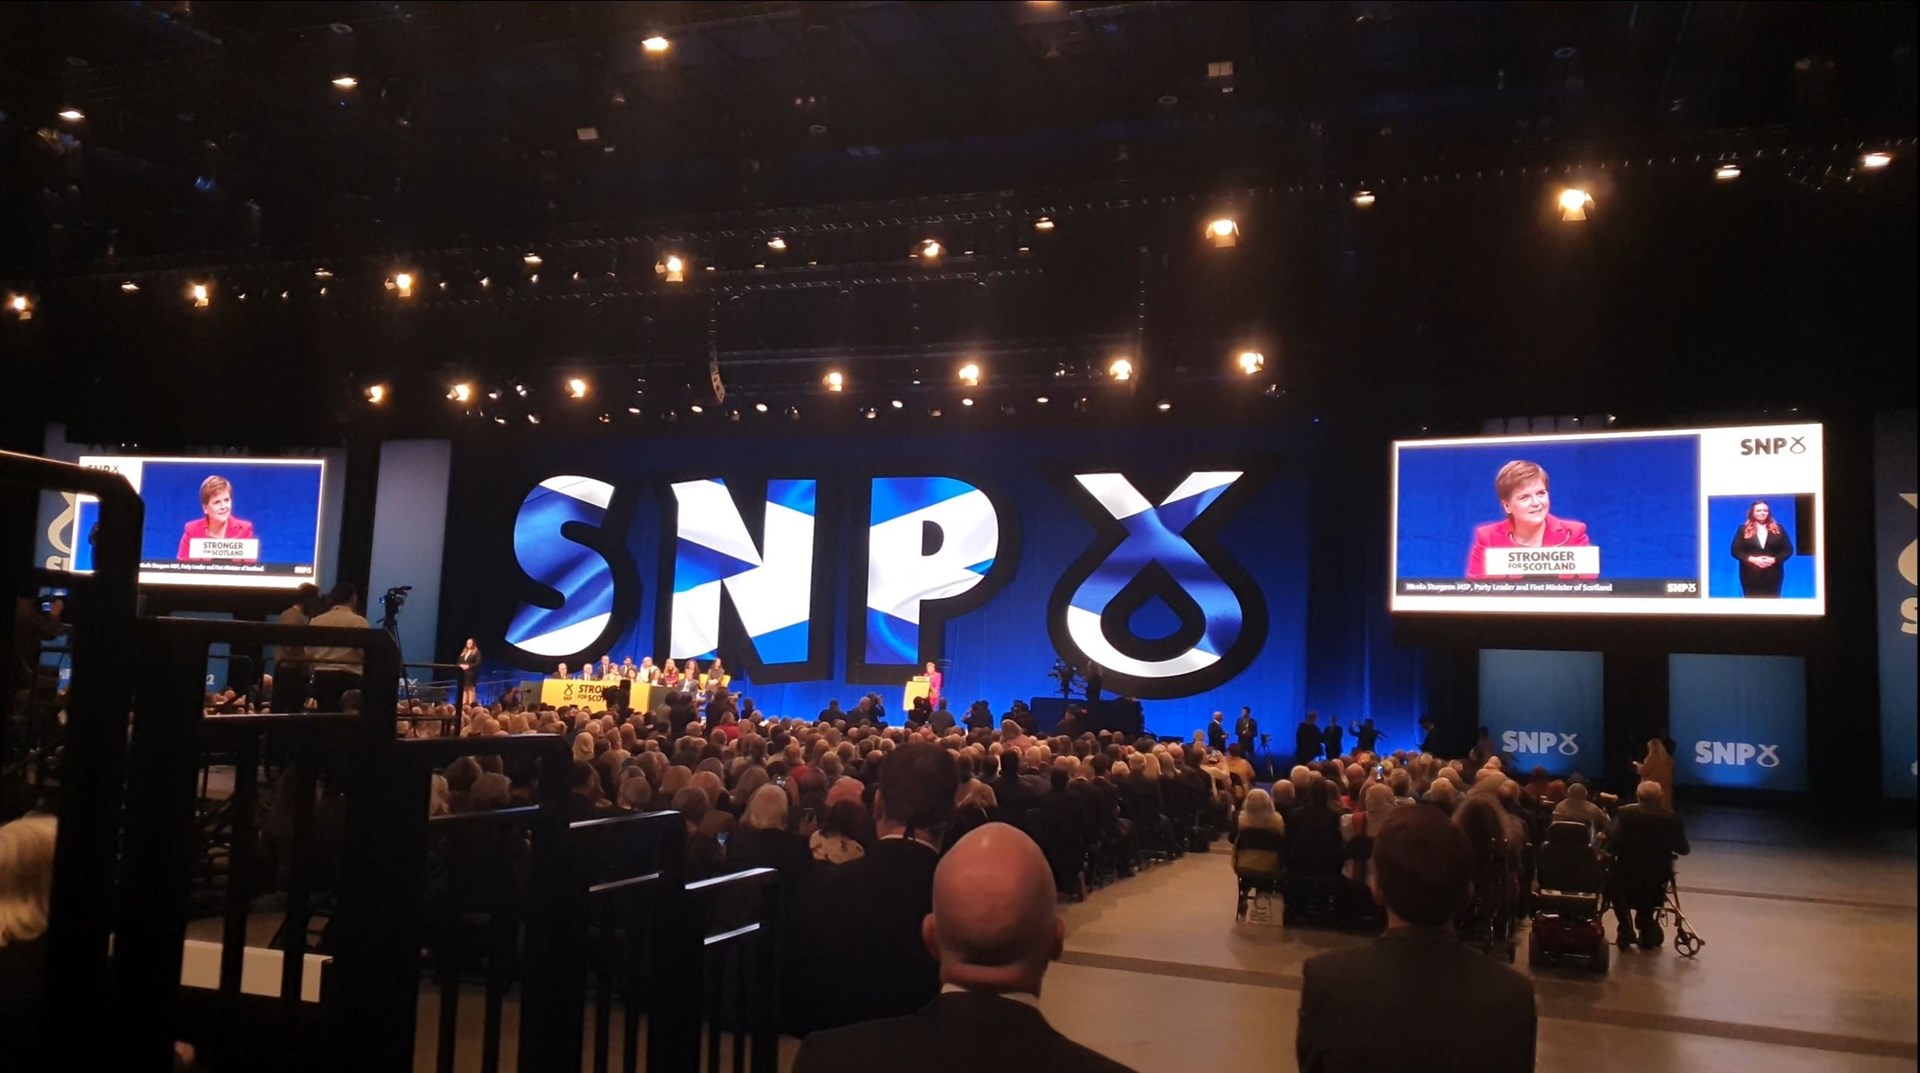 Sturgeon announced the new funding during her keynote address at the SNP conference.